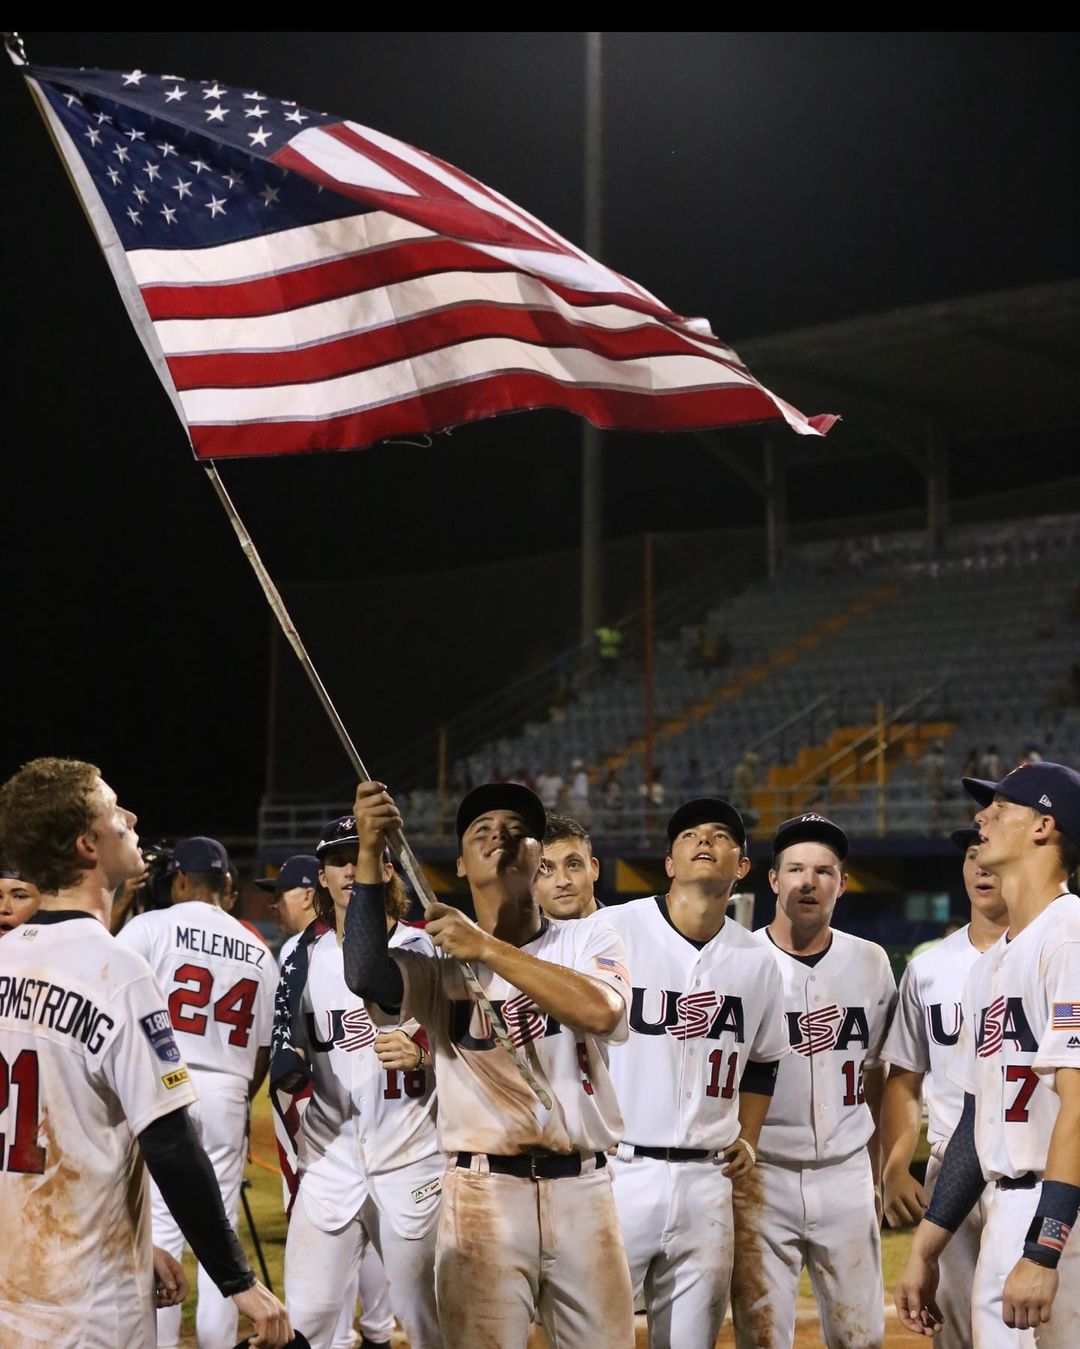 Anthony Volpe representing Team USA in the U-15 Baseball World Cup